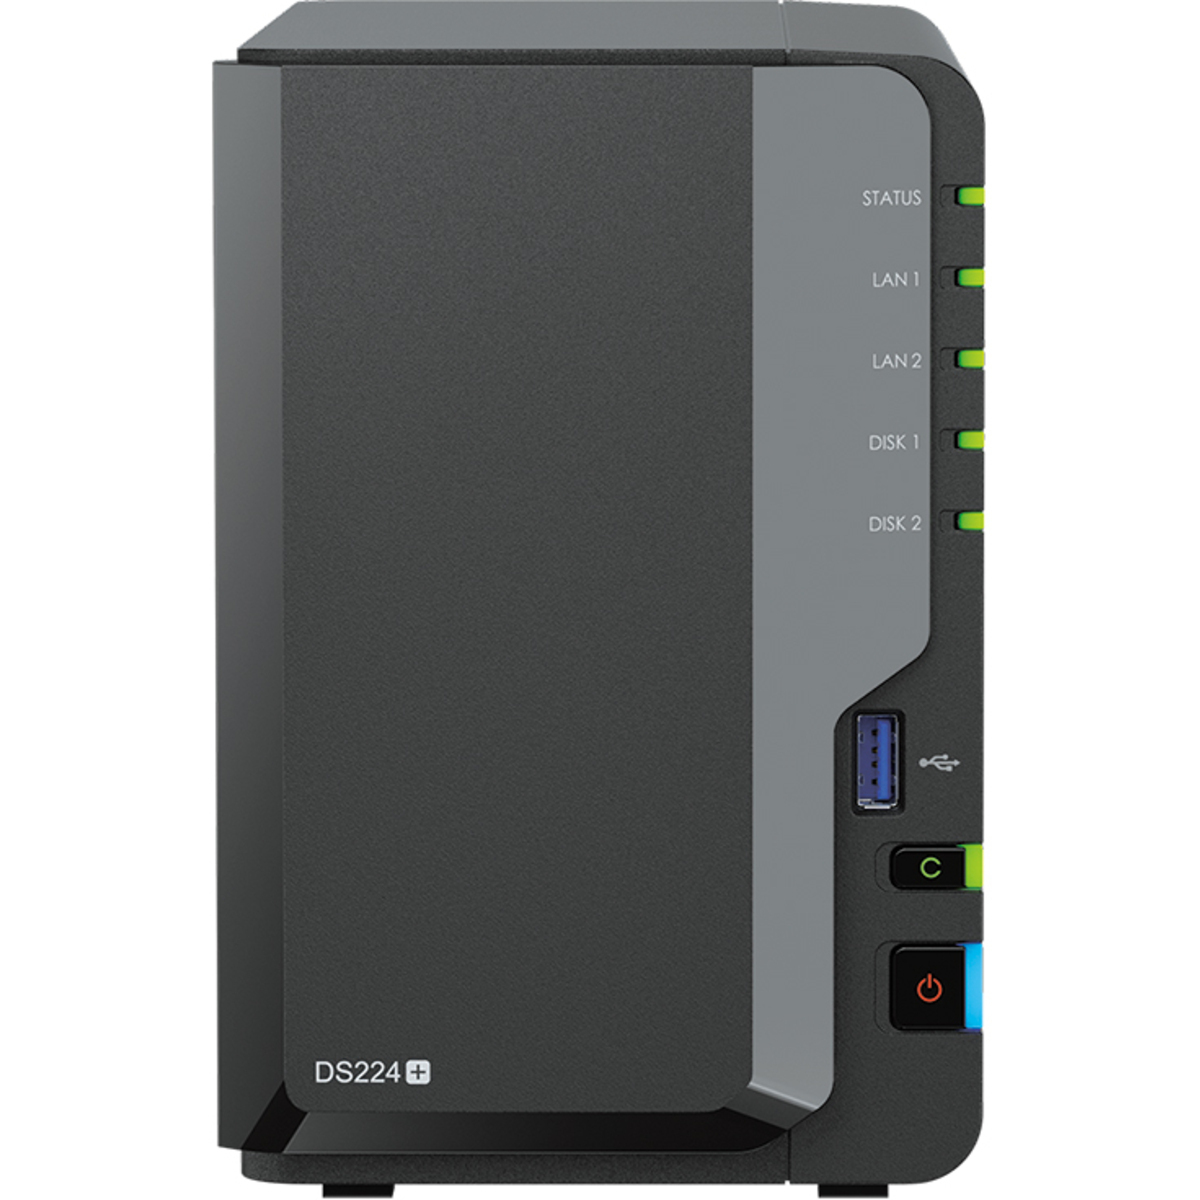 buy Synology DiskStation DS224+ 44tb Desktop NAS - Network Attached Storage Device 2x22000gb Western Digital Red Pro WD221KFGX 3.5 7200rpm SATA 6Gb/s HDD NAS Class Drives Installed - Burn-In Tested - ON SALE - FREE RAM UPGRADE - nas headquarters buy network attached storage server device das new raid-5 free shipping usa spring sale DiskStation DS224+